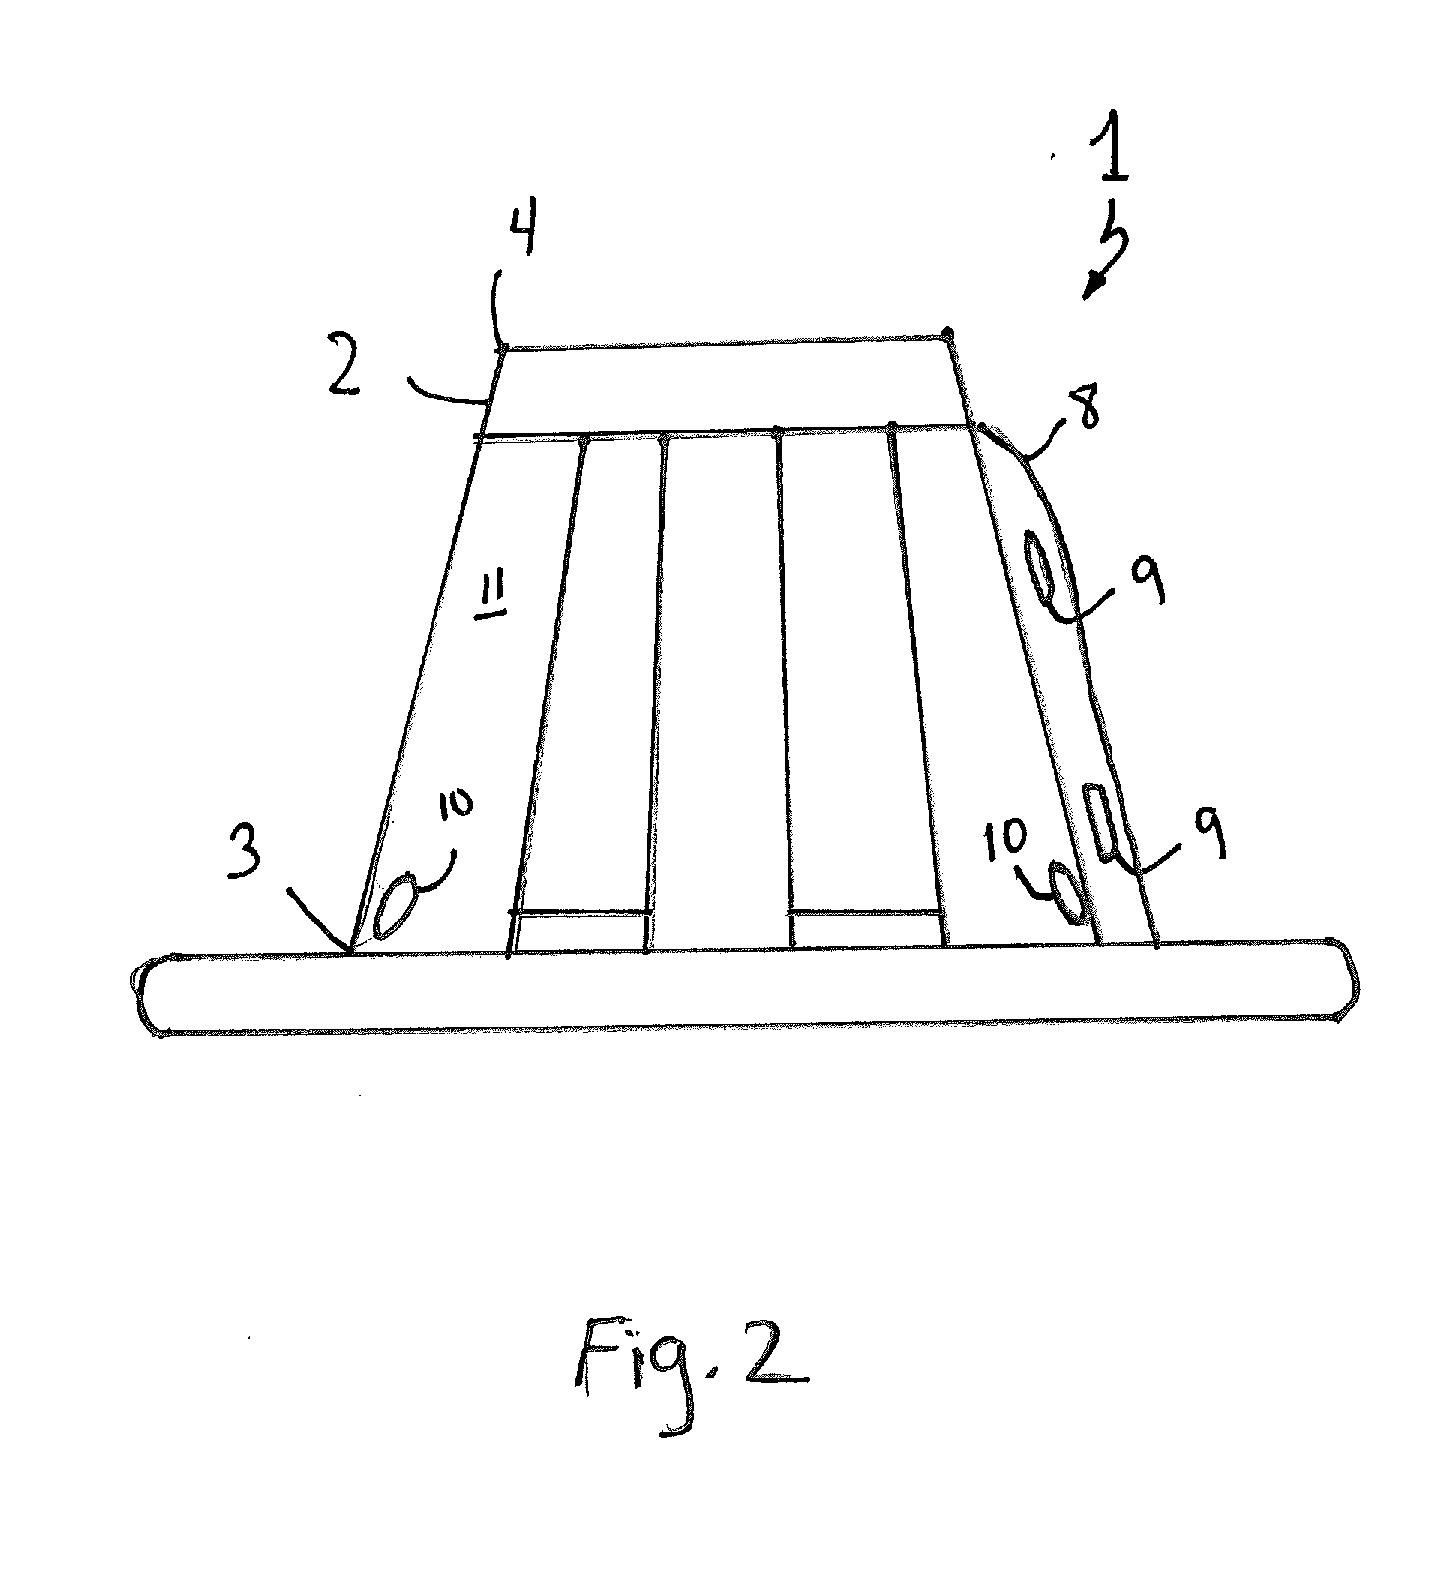 Apparatus and method for cultivating a tree